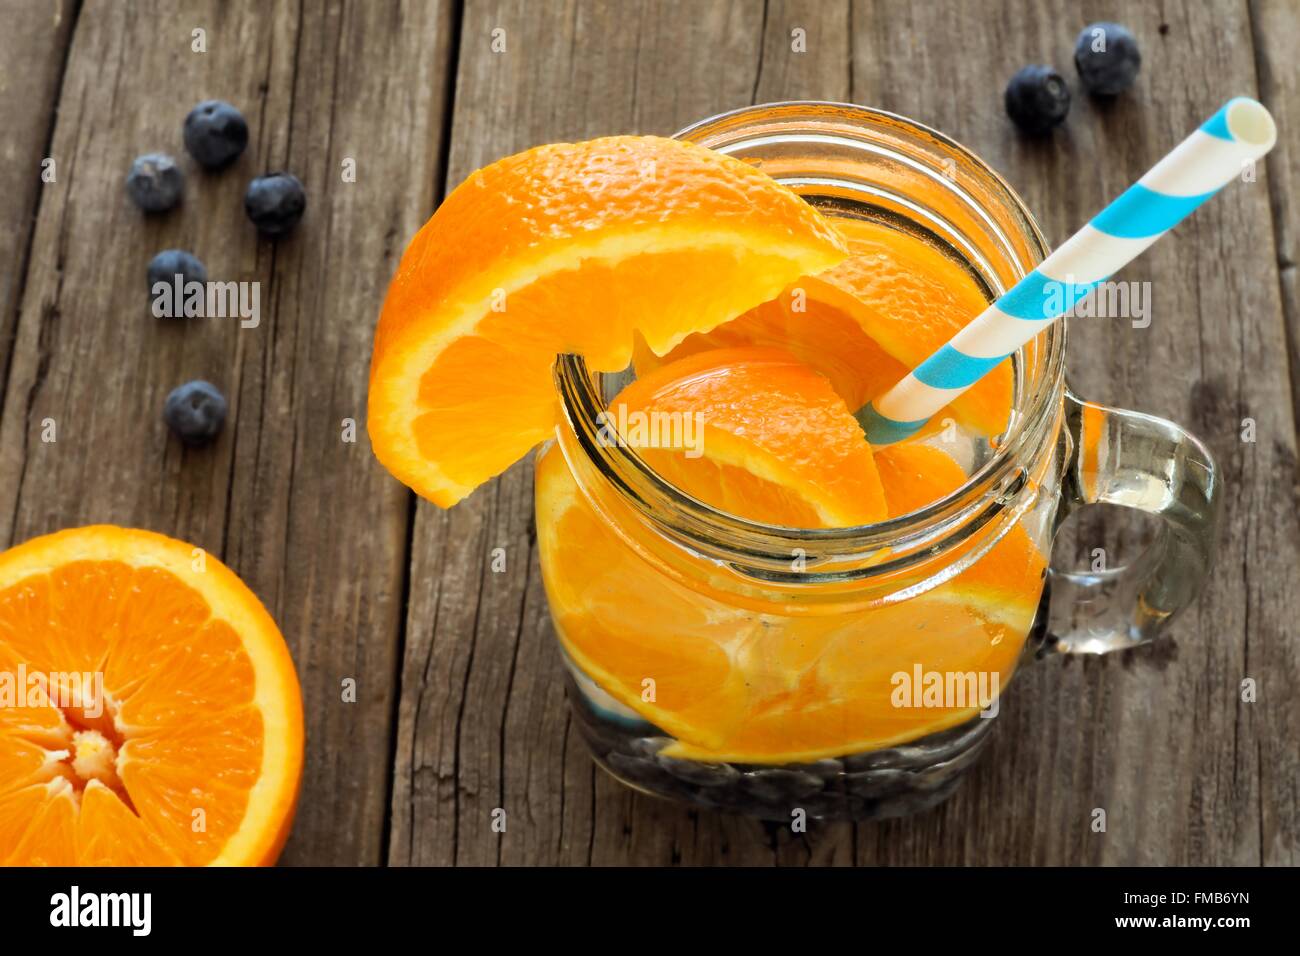 Detox water with oranges and blueberries in a mason jar with straw. Downward view on wood. Stock Photo